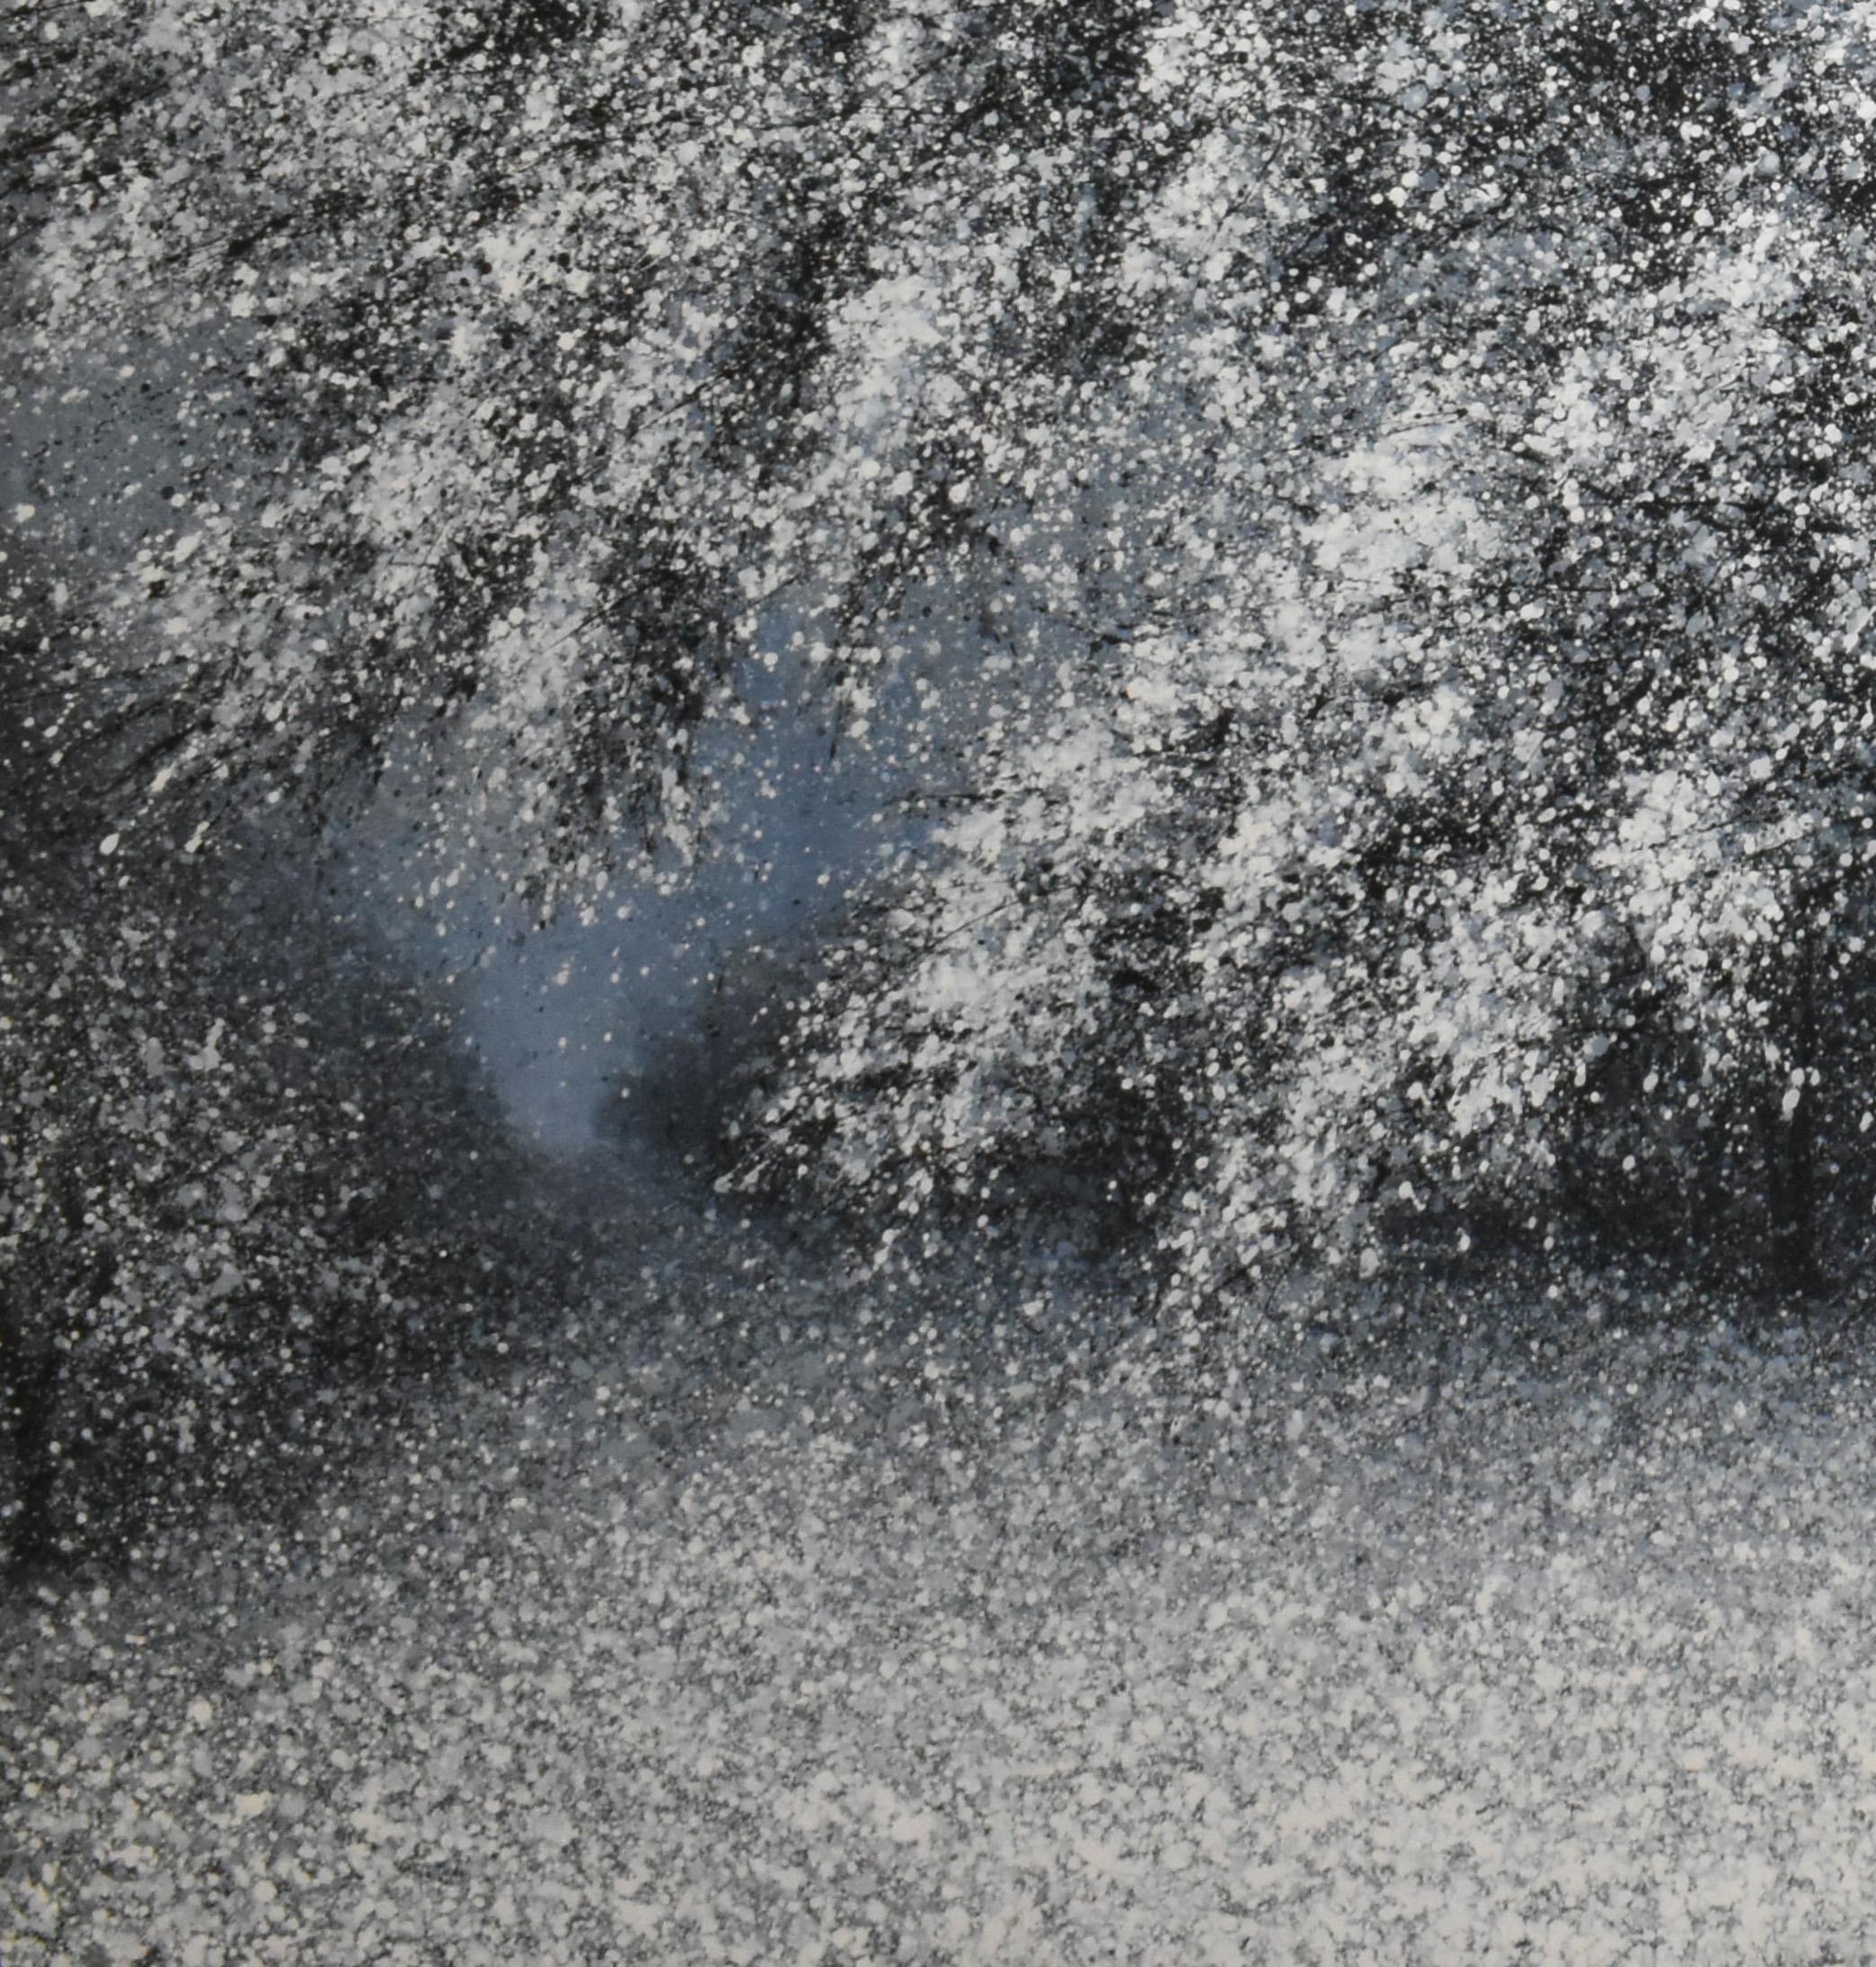 White Snow Winter Forest in Calm-Pointillism Landscape by the Thailand artist - Gray Landscape Painting by Narate Kathong